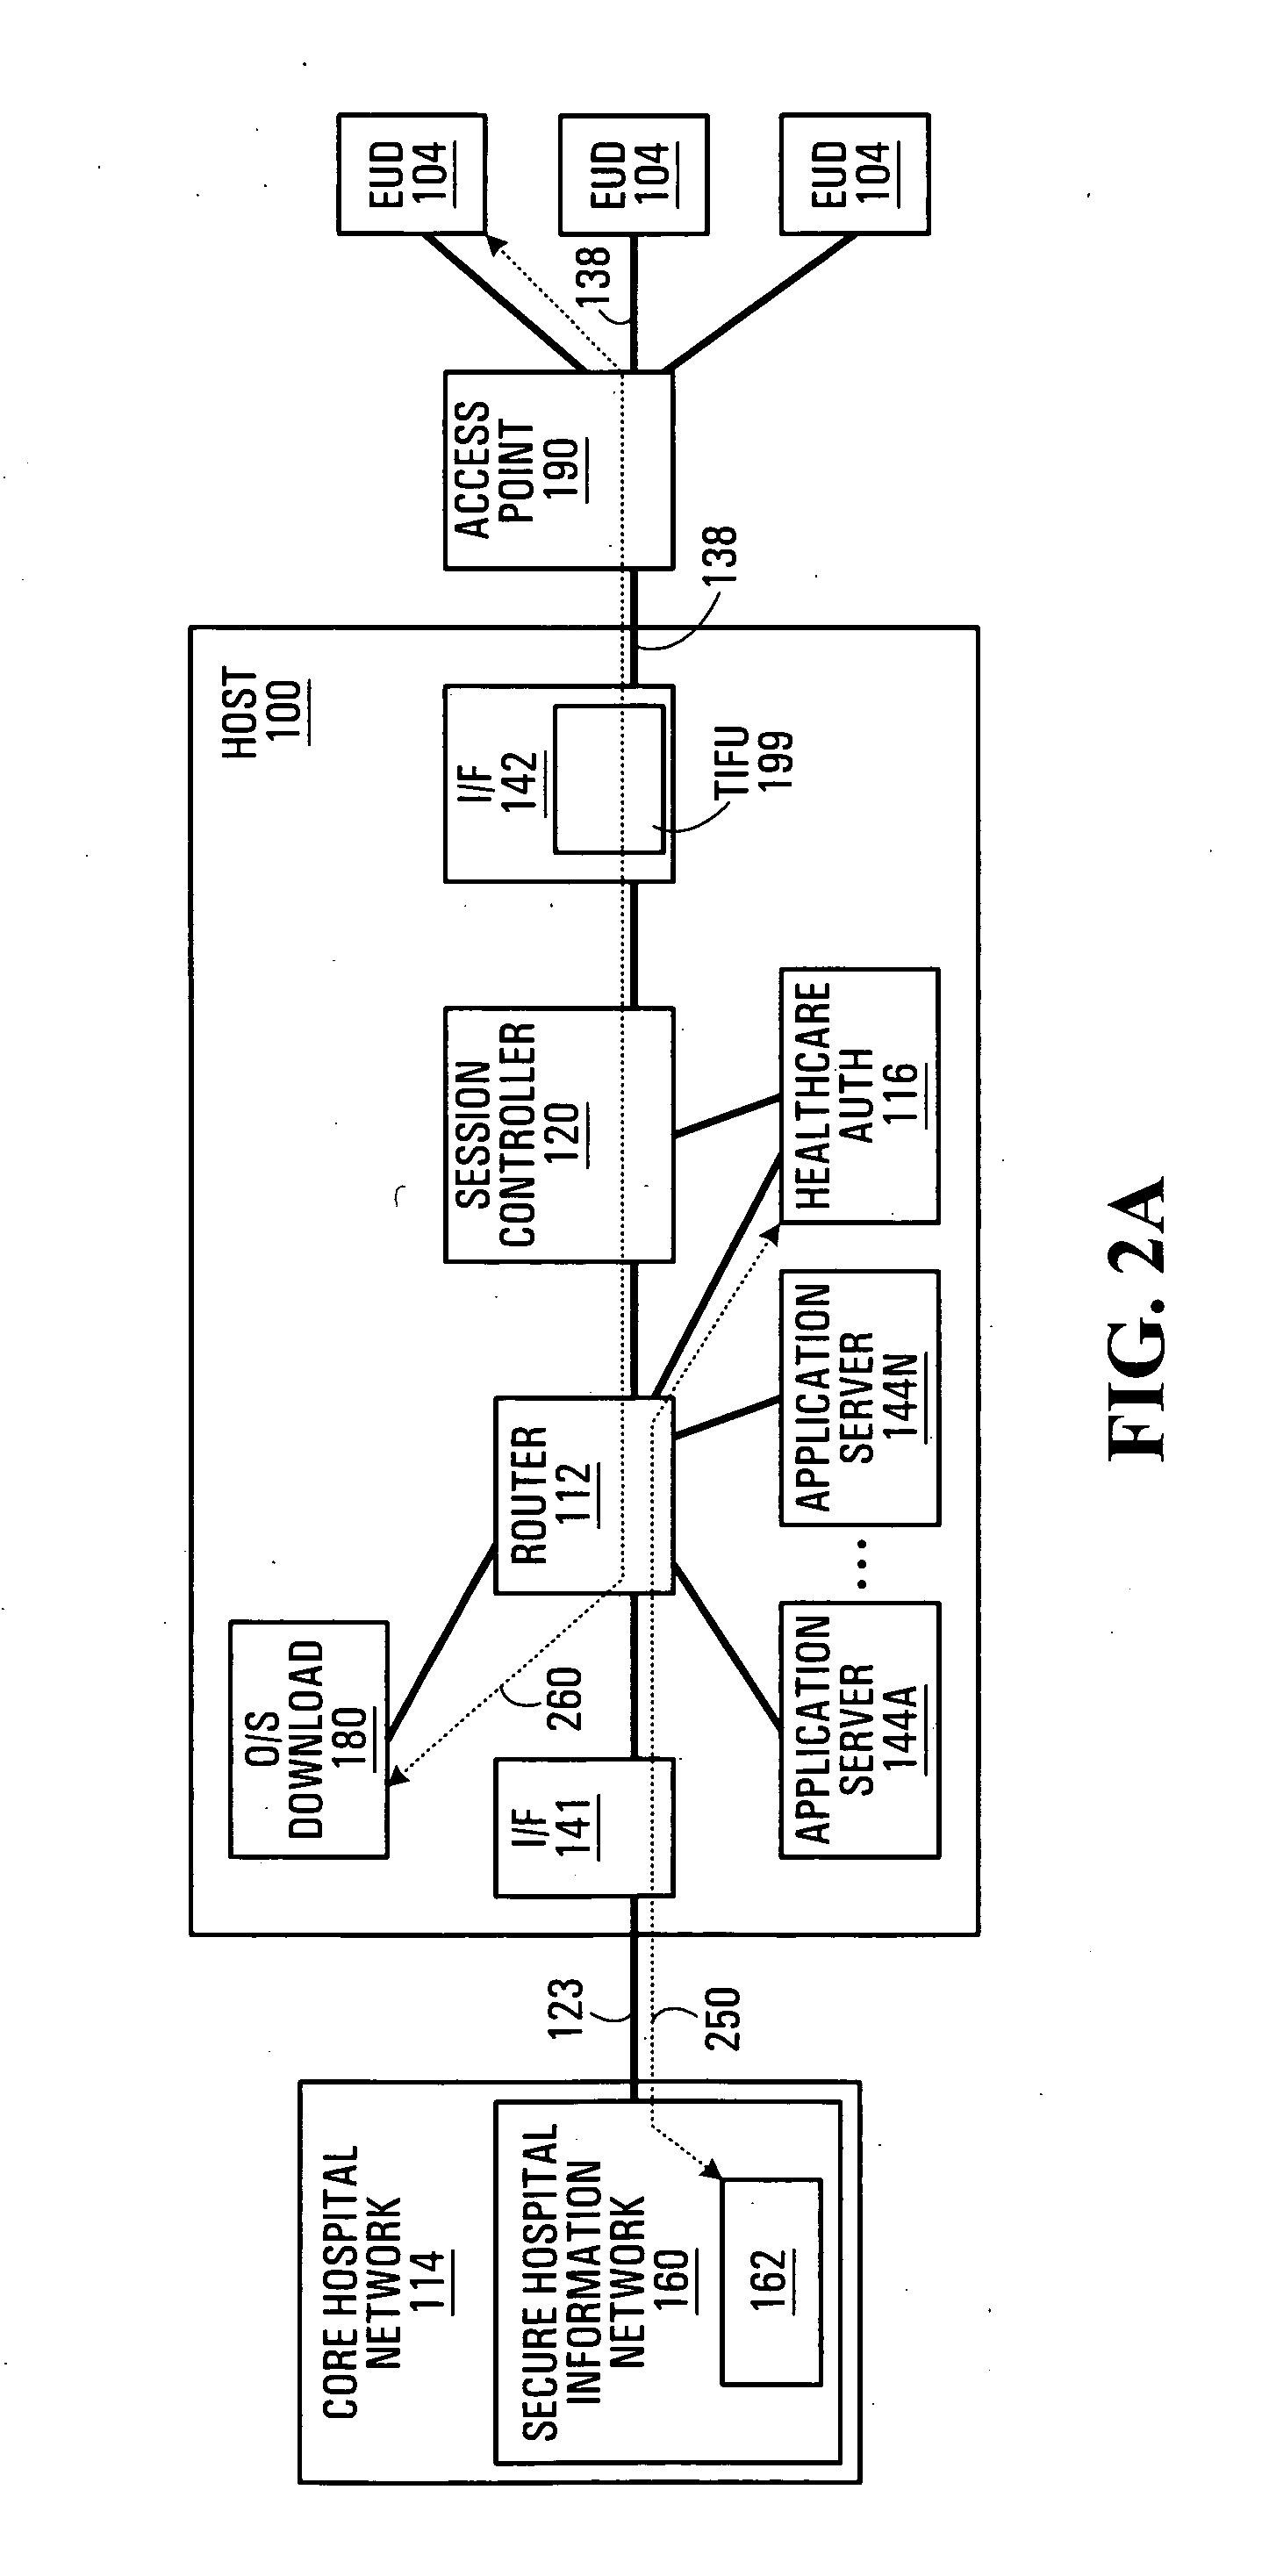 Systems and methods for preserving confidentiality of sensitive information in a point-of-care communications environment